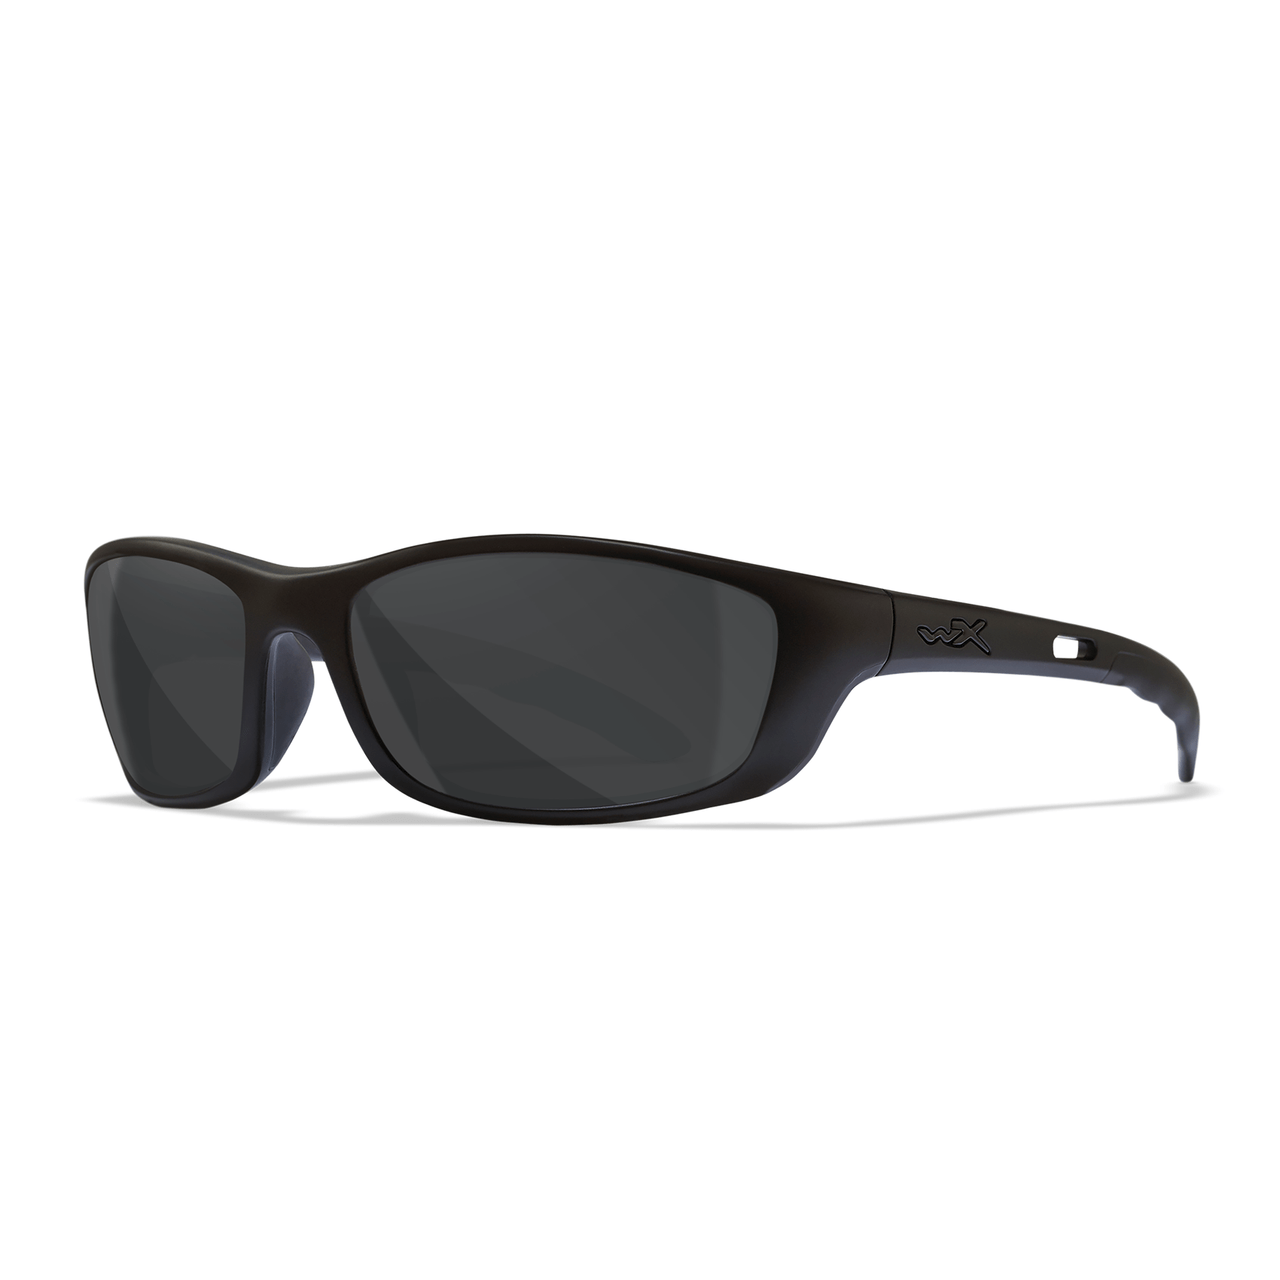 Wiley X P-17M Black Ops Safety Sunglasses with Matte Black Frame and Smoke Grey Lens